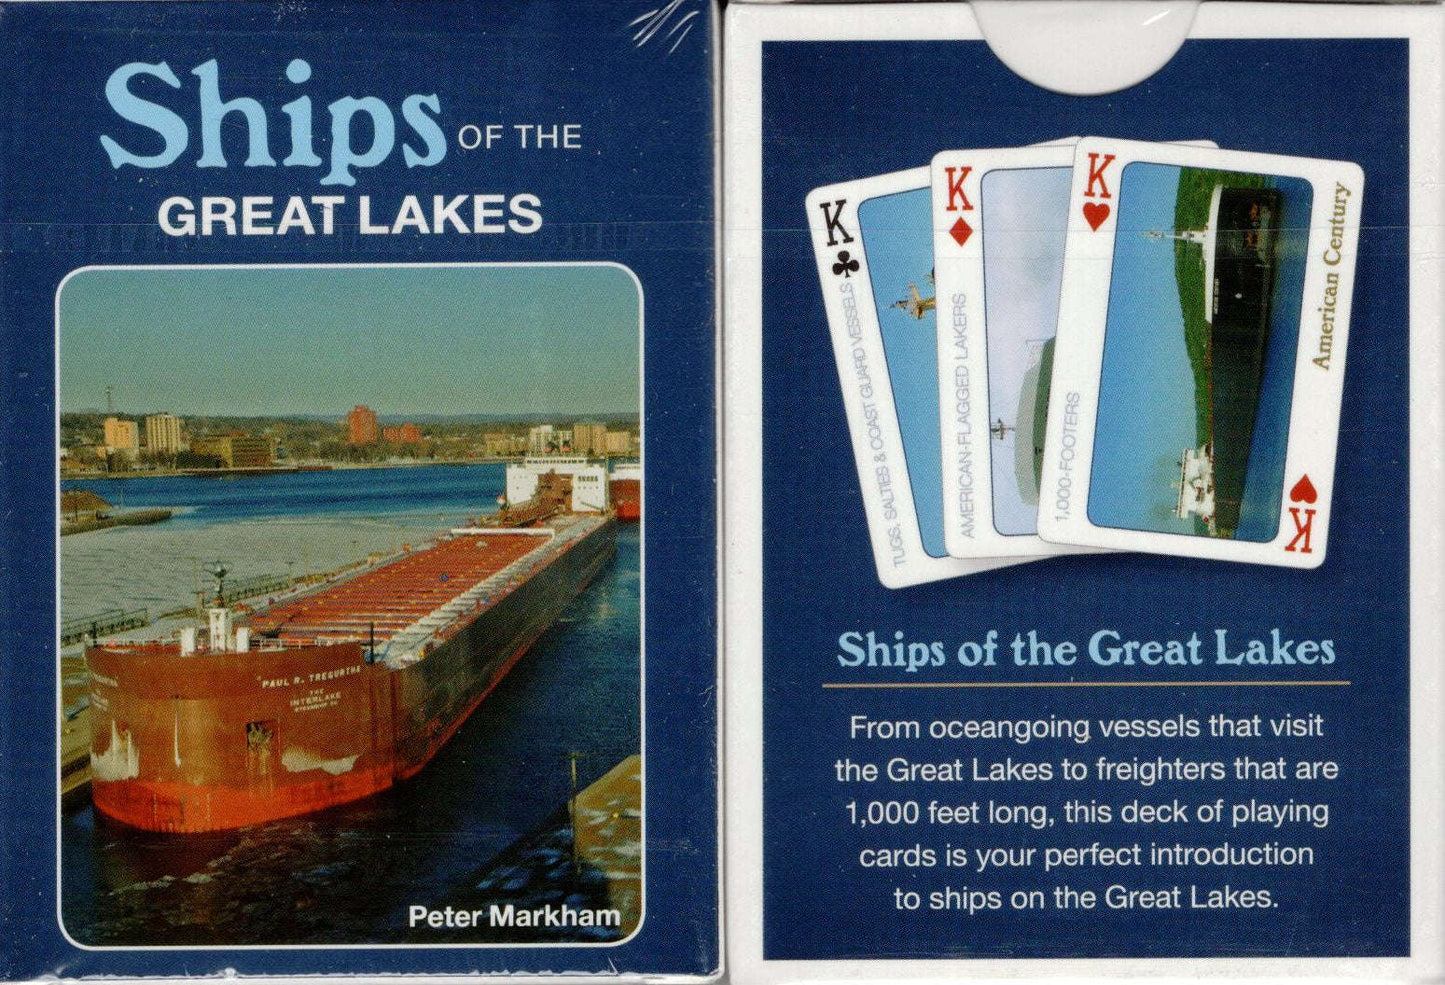 PlayingCardDecks.com-Ships of the Great Lakes Playing Cards